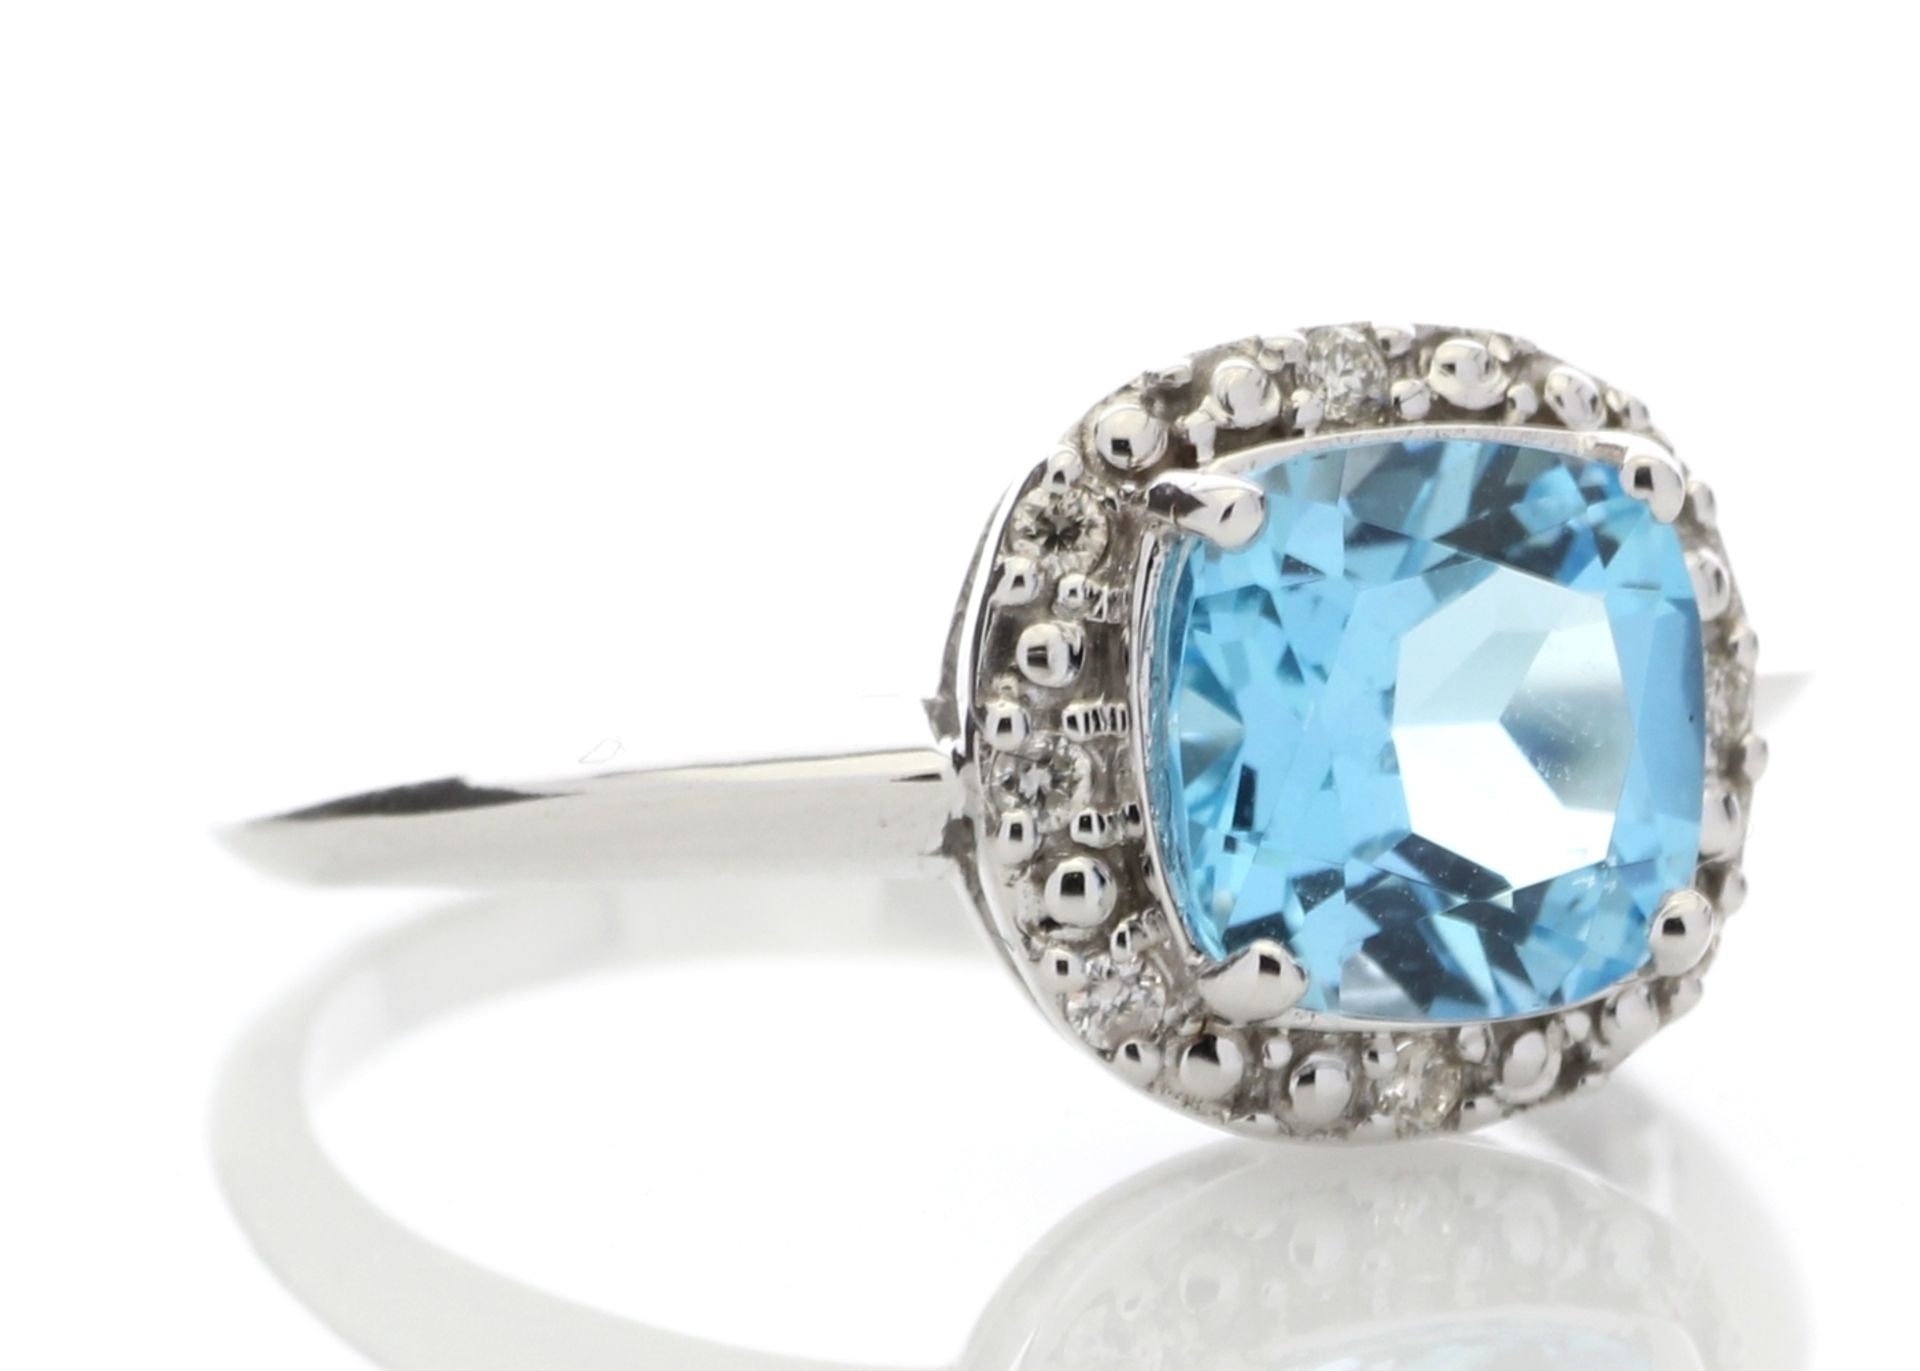 9ct White Gold Blue Topaz Diamond Ring 0.07 Carats - Valued by GIE £1,895.00 - 9ct White Gold Blue - Image 4 of 5